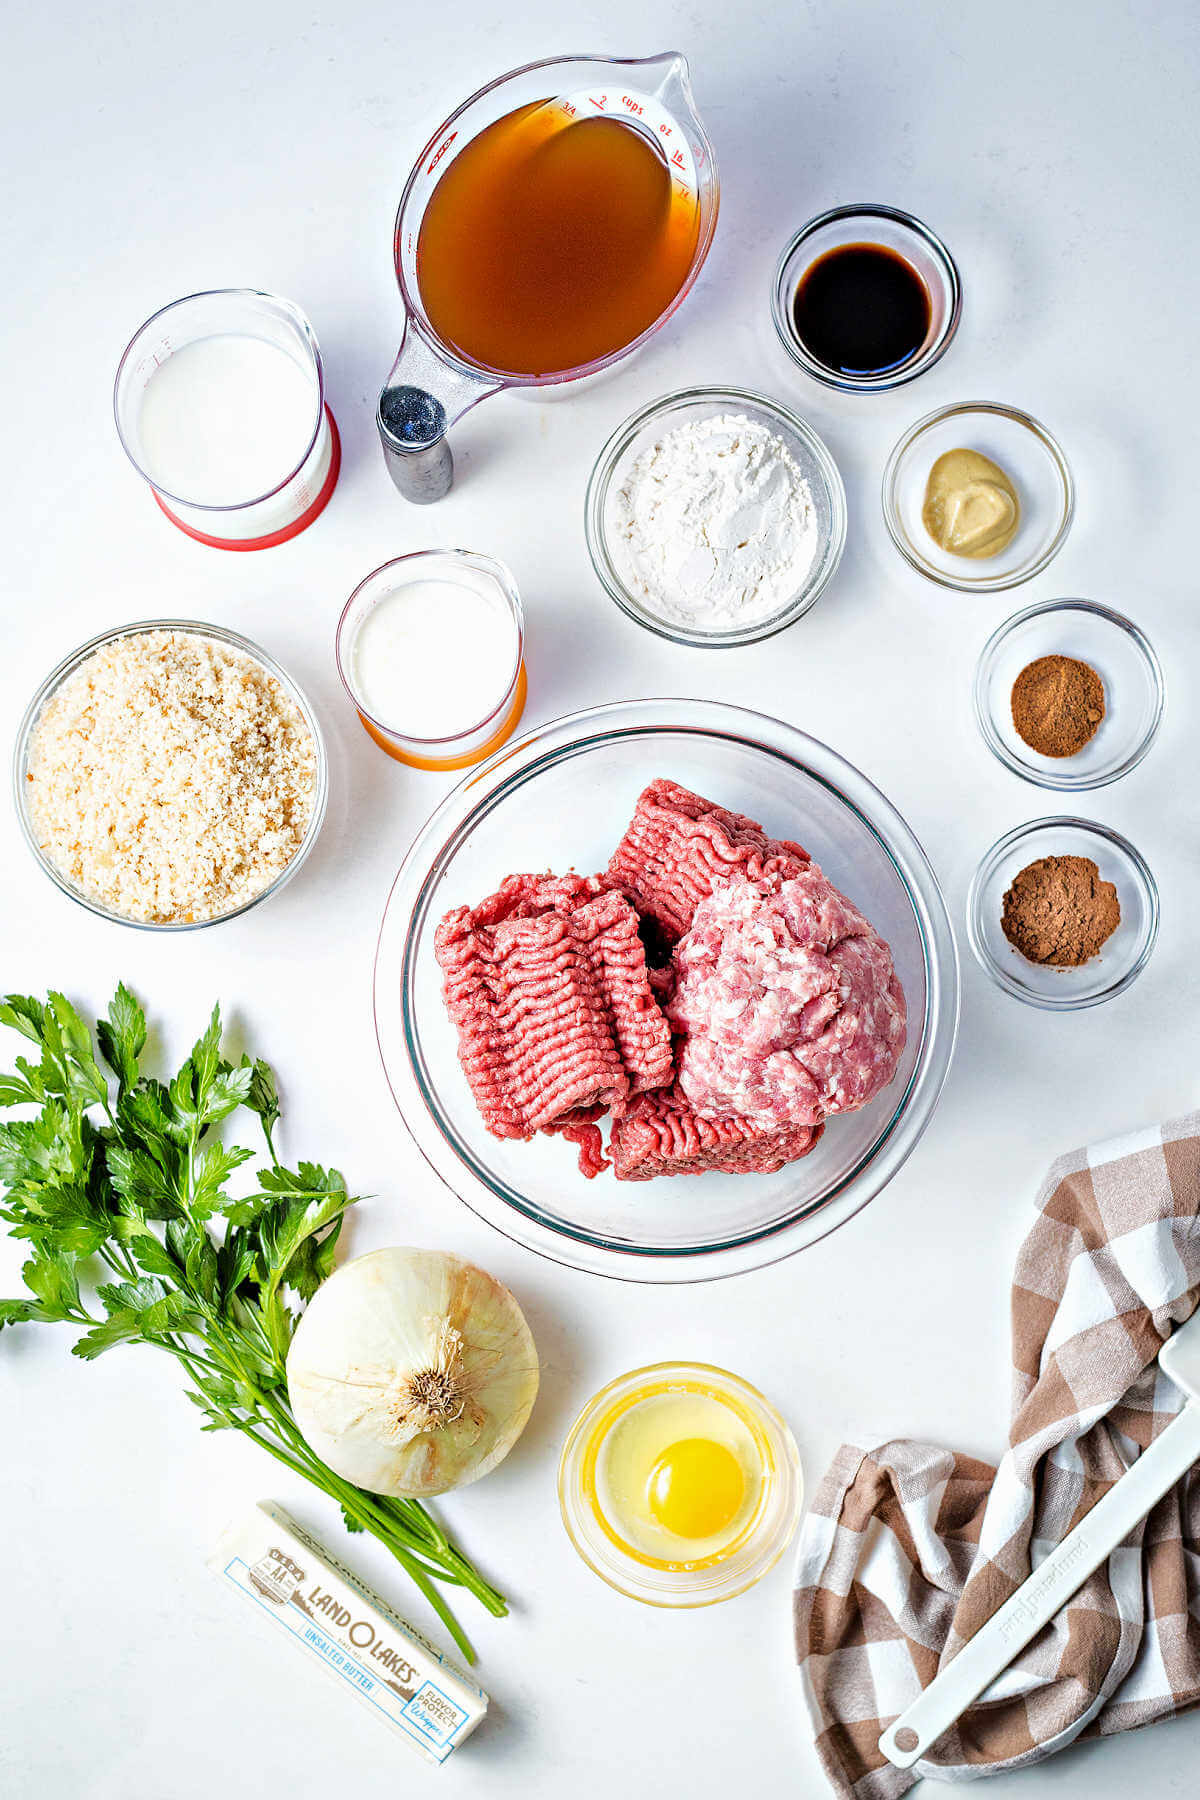 ingredients for Swedish meatballs on a table.